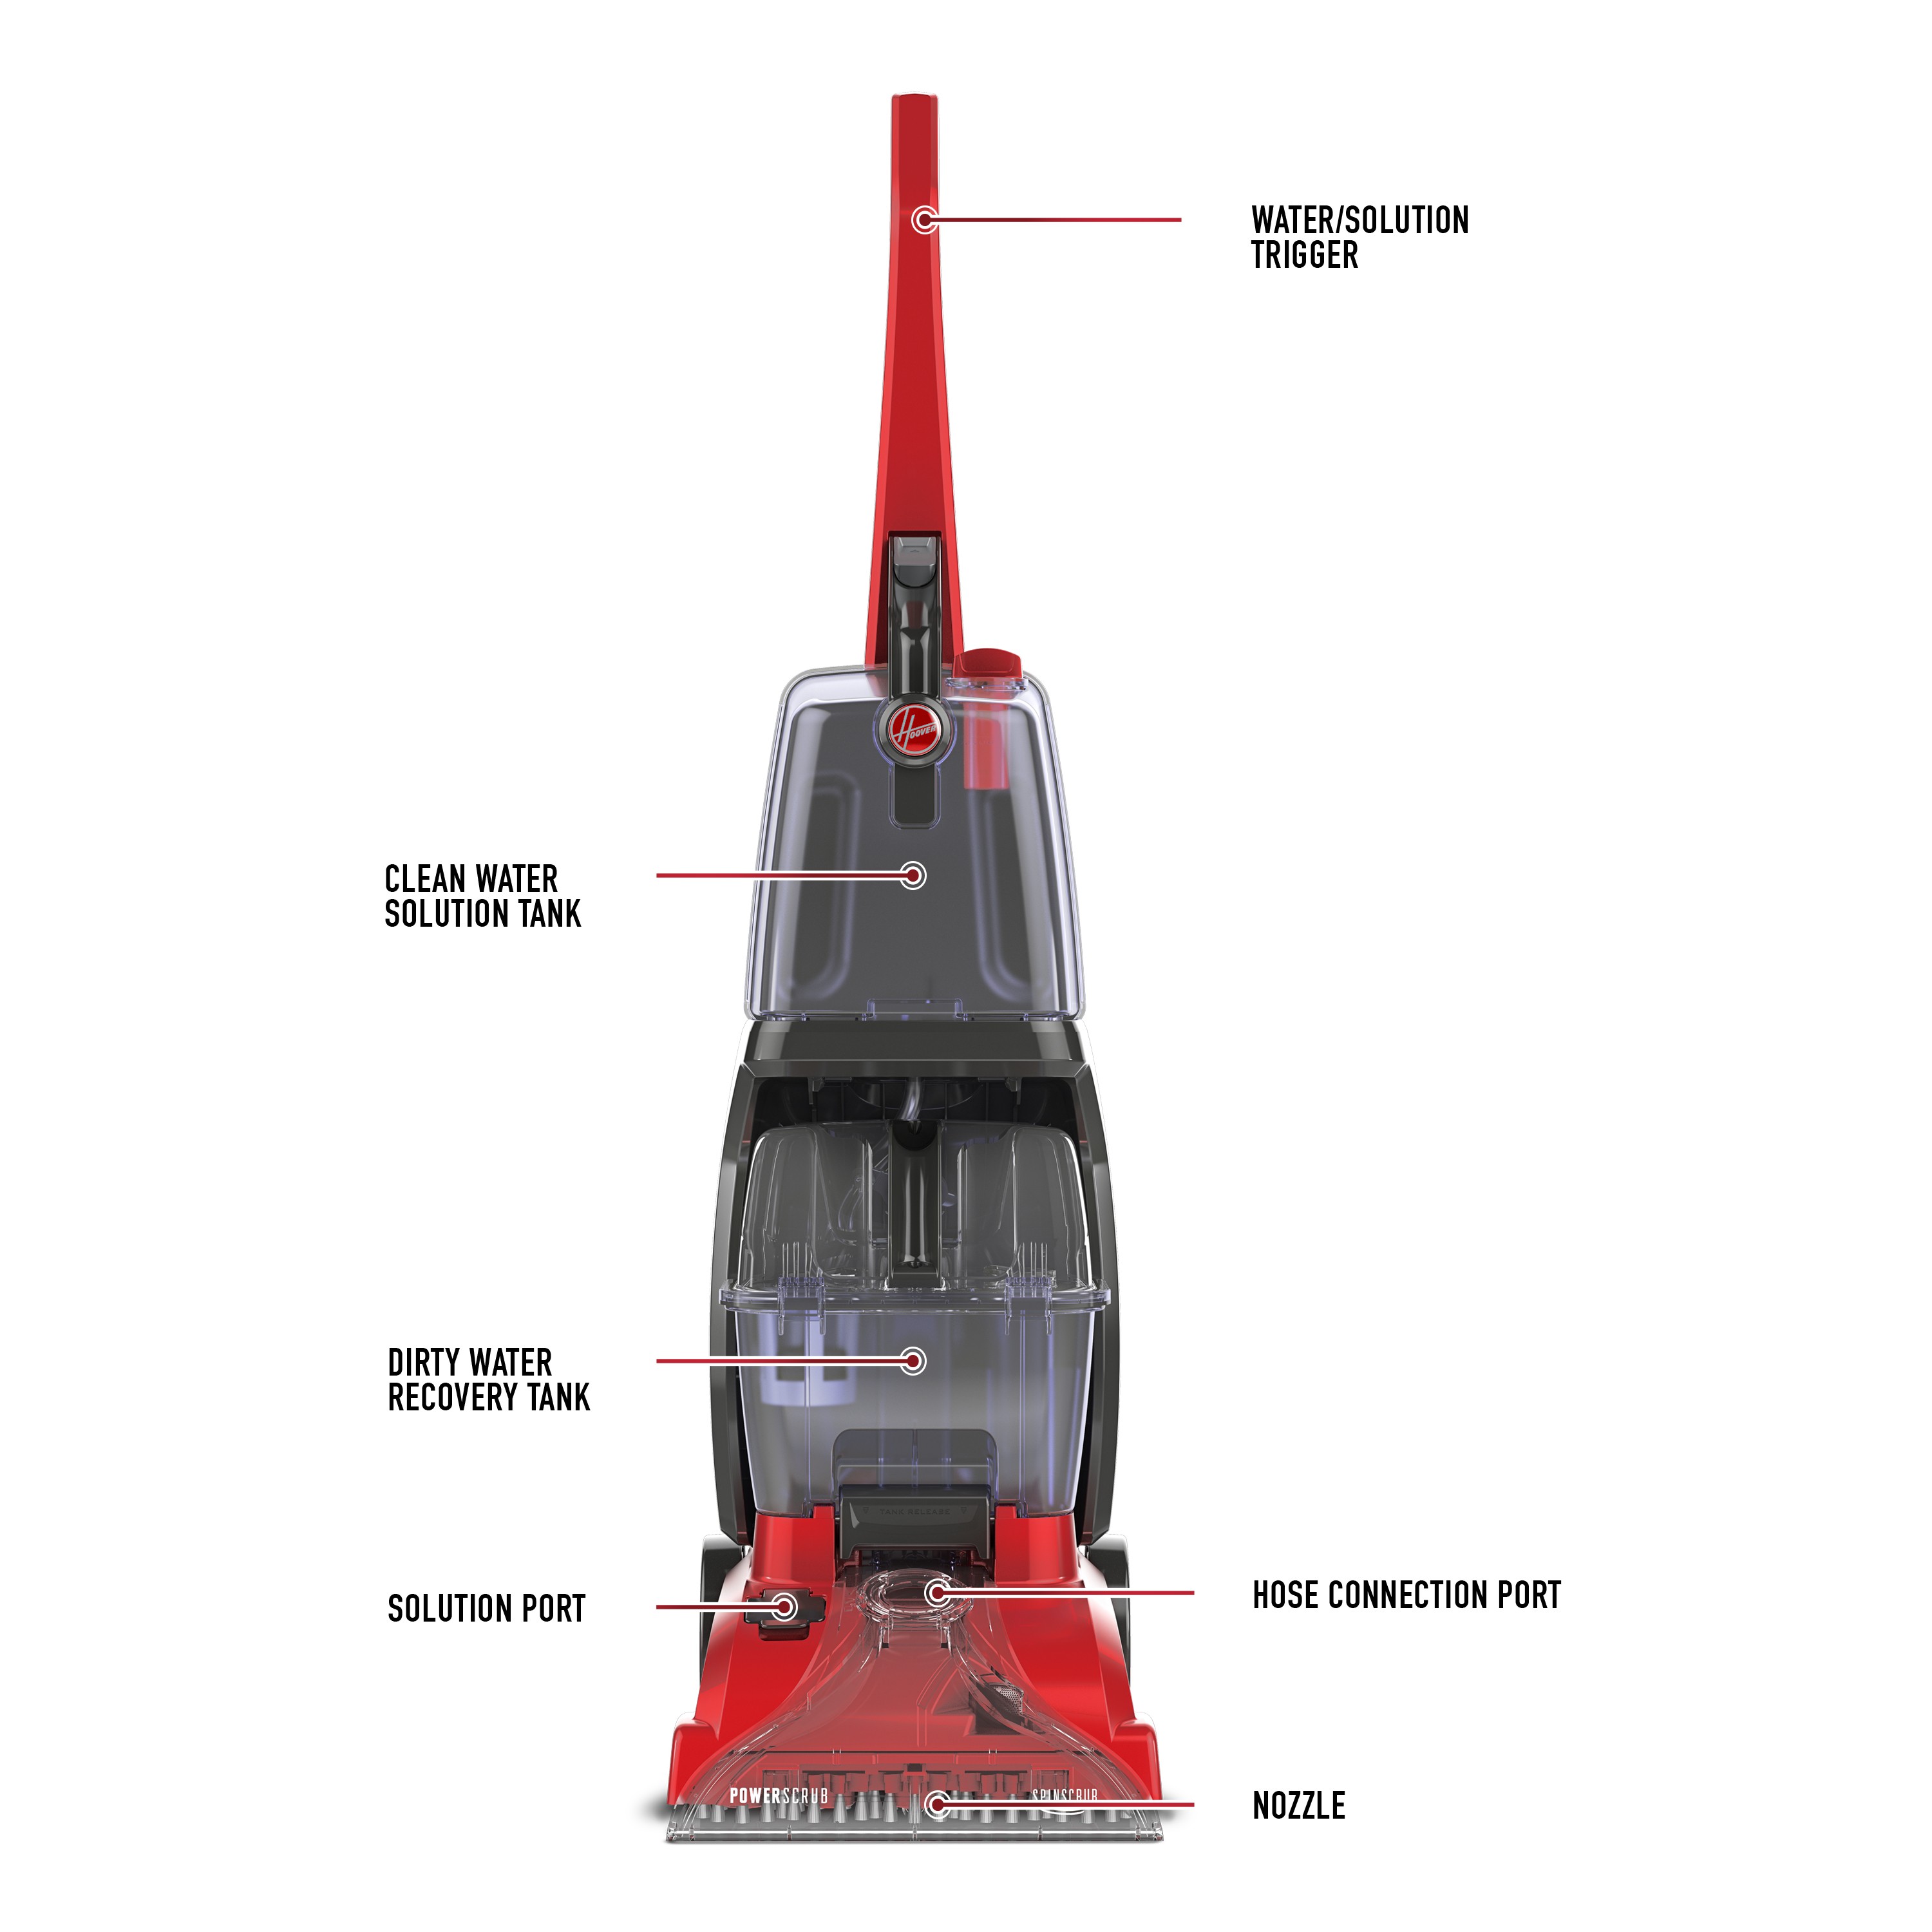 Bissell Carpet Cleaner Parts Diagram Hoover Power Scrub Carpet Cleaner W Spinscrub Technology Fh Of Bissell Carpet Cleaner Parts Diagram